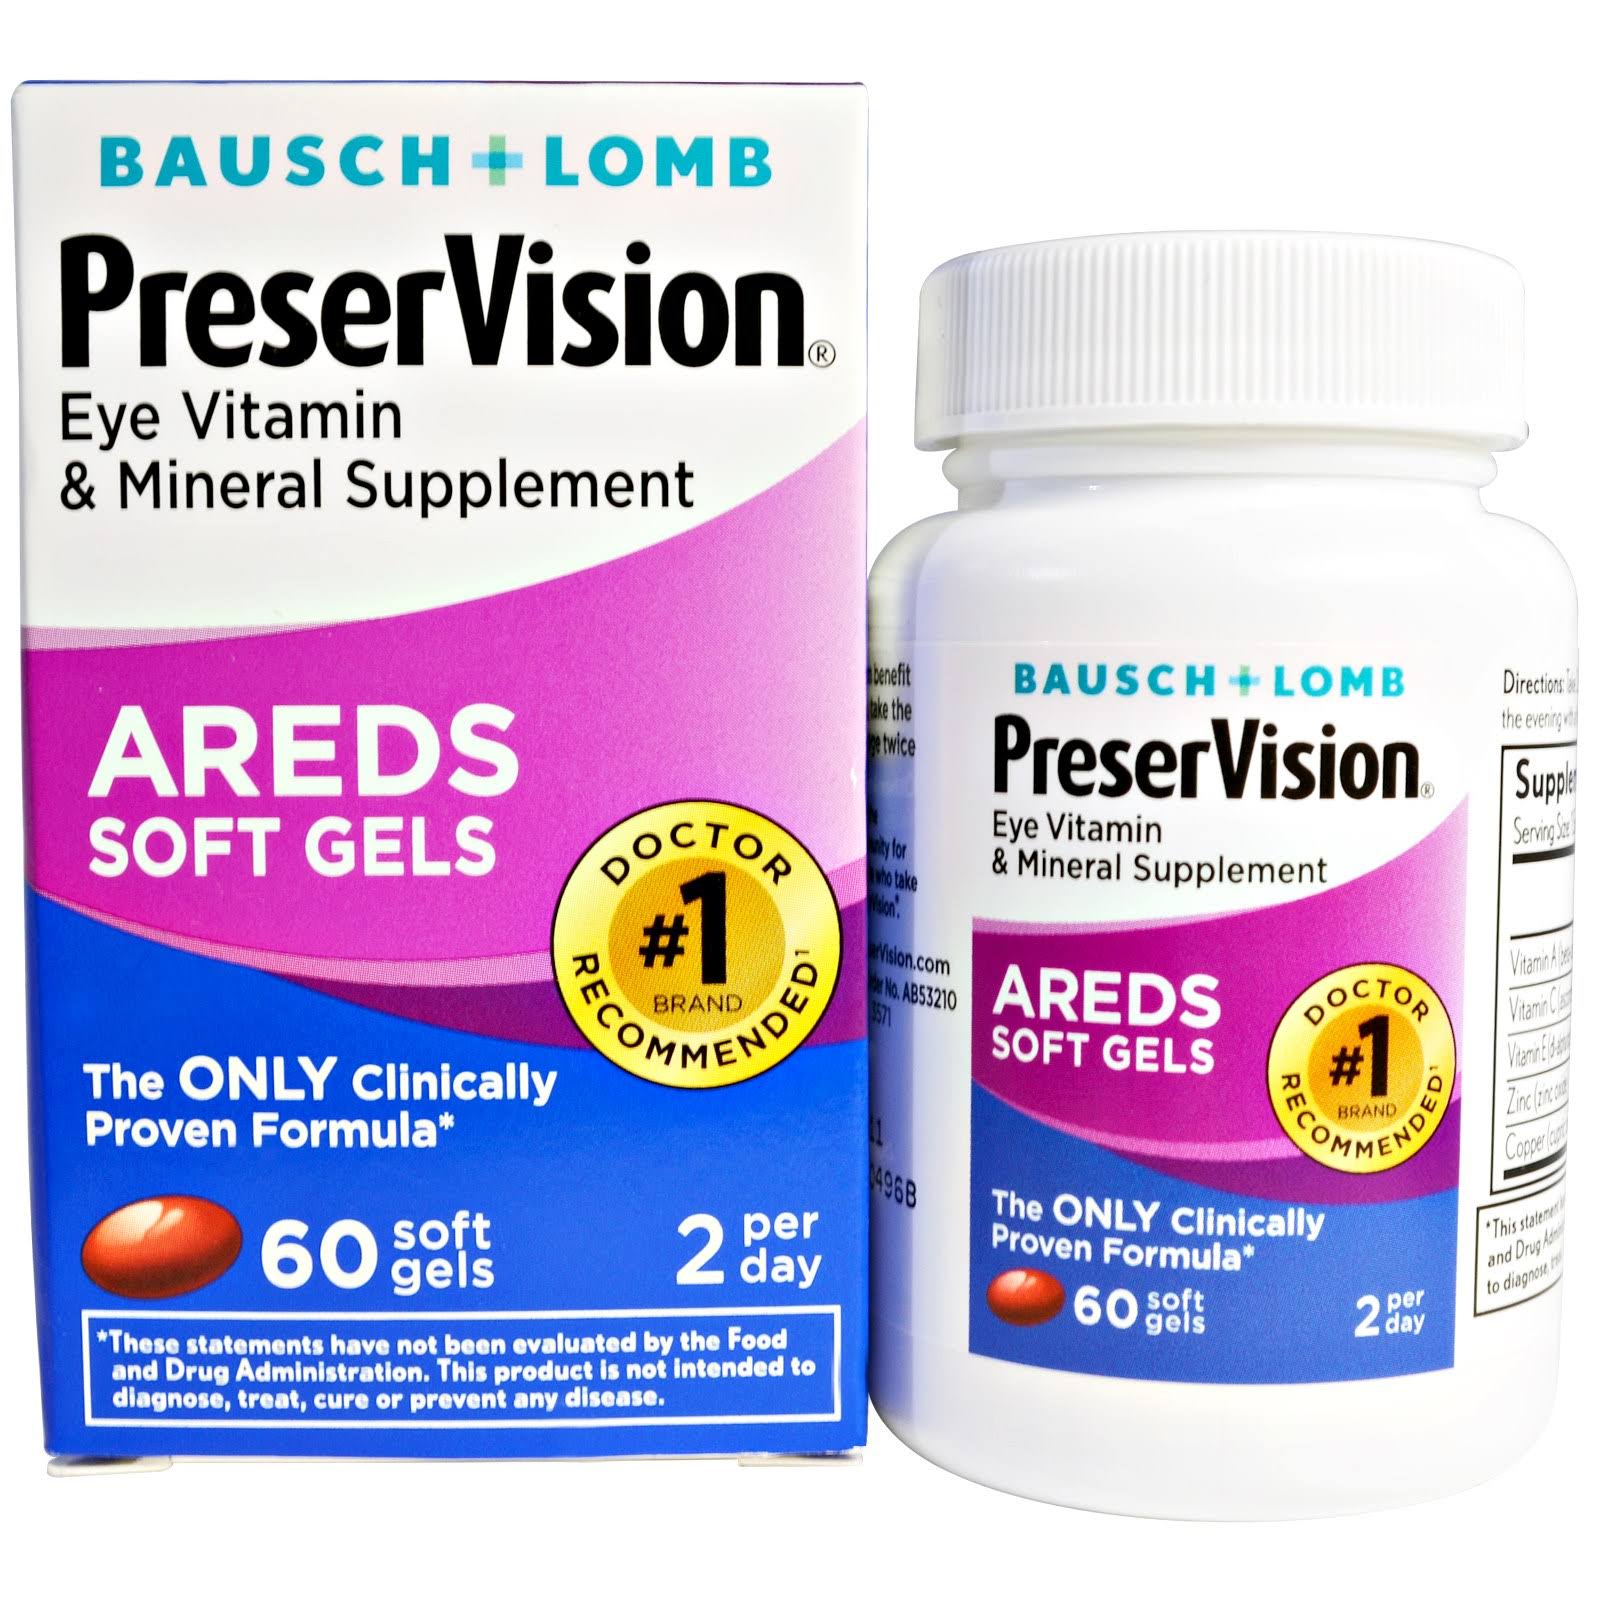 Bausch + Lomb PreserVision Eye Vitamin & Mineral Supplement - x60